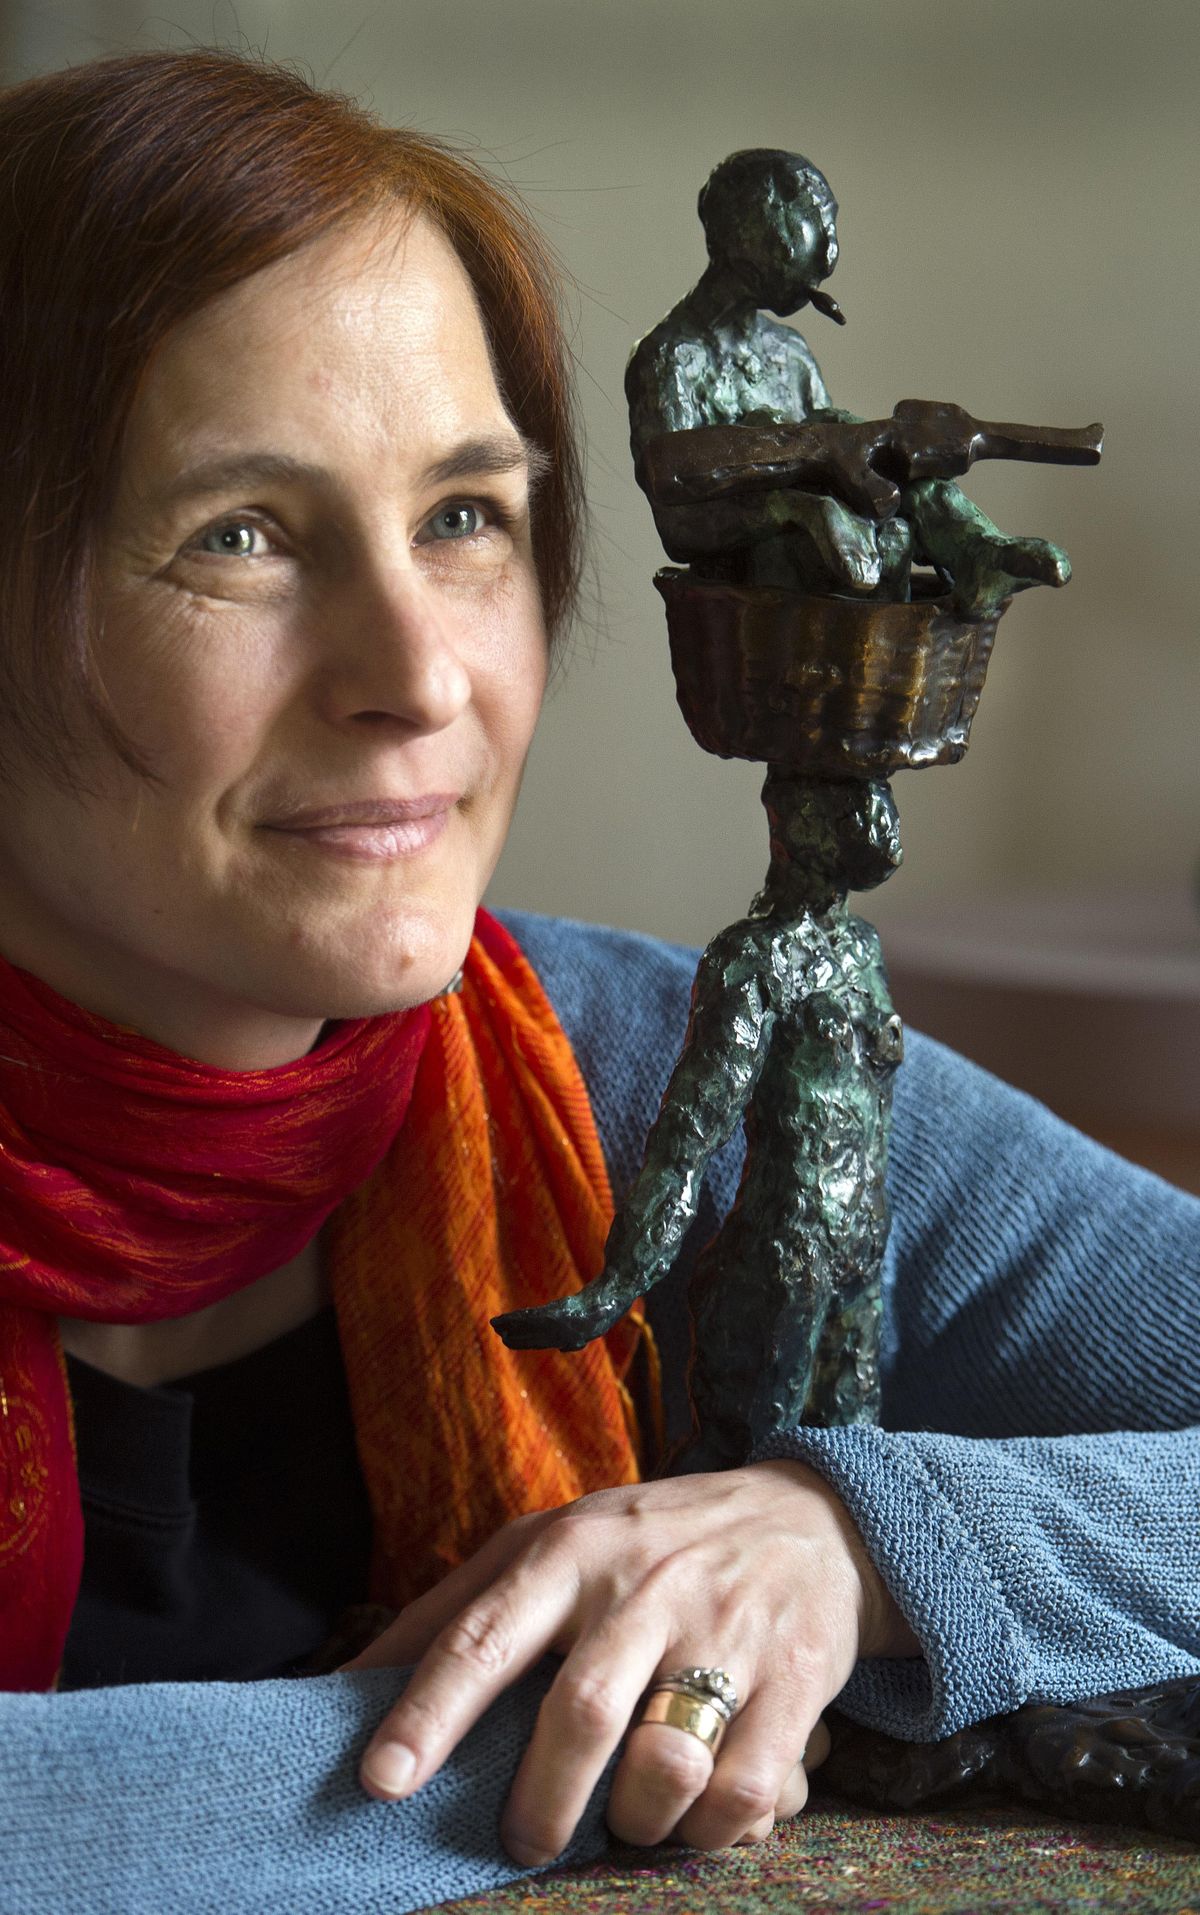 Spokane artist Ildikó Kalapács, whose bronze sculpture Bearing is slated to be installed in Kendall Yards’s Sunset Park in 2021, continues her efforts around the issues facing refugees. Her latest exhibit, “Unwanted Journeys,” features drawings and sculpture by Kalapács, as well as stories by refugees now living in the Spokane area. (Dan Pelle / The Spokesman-Review)